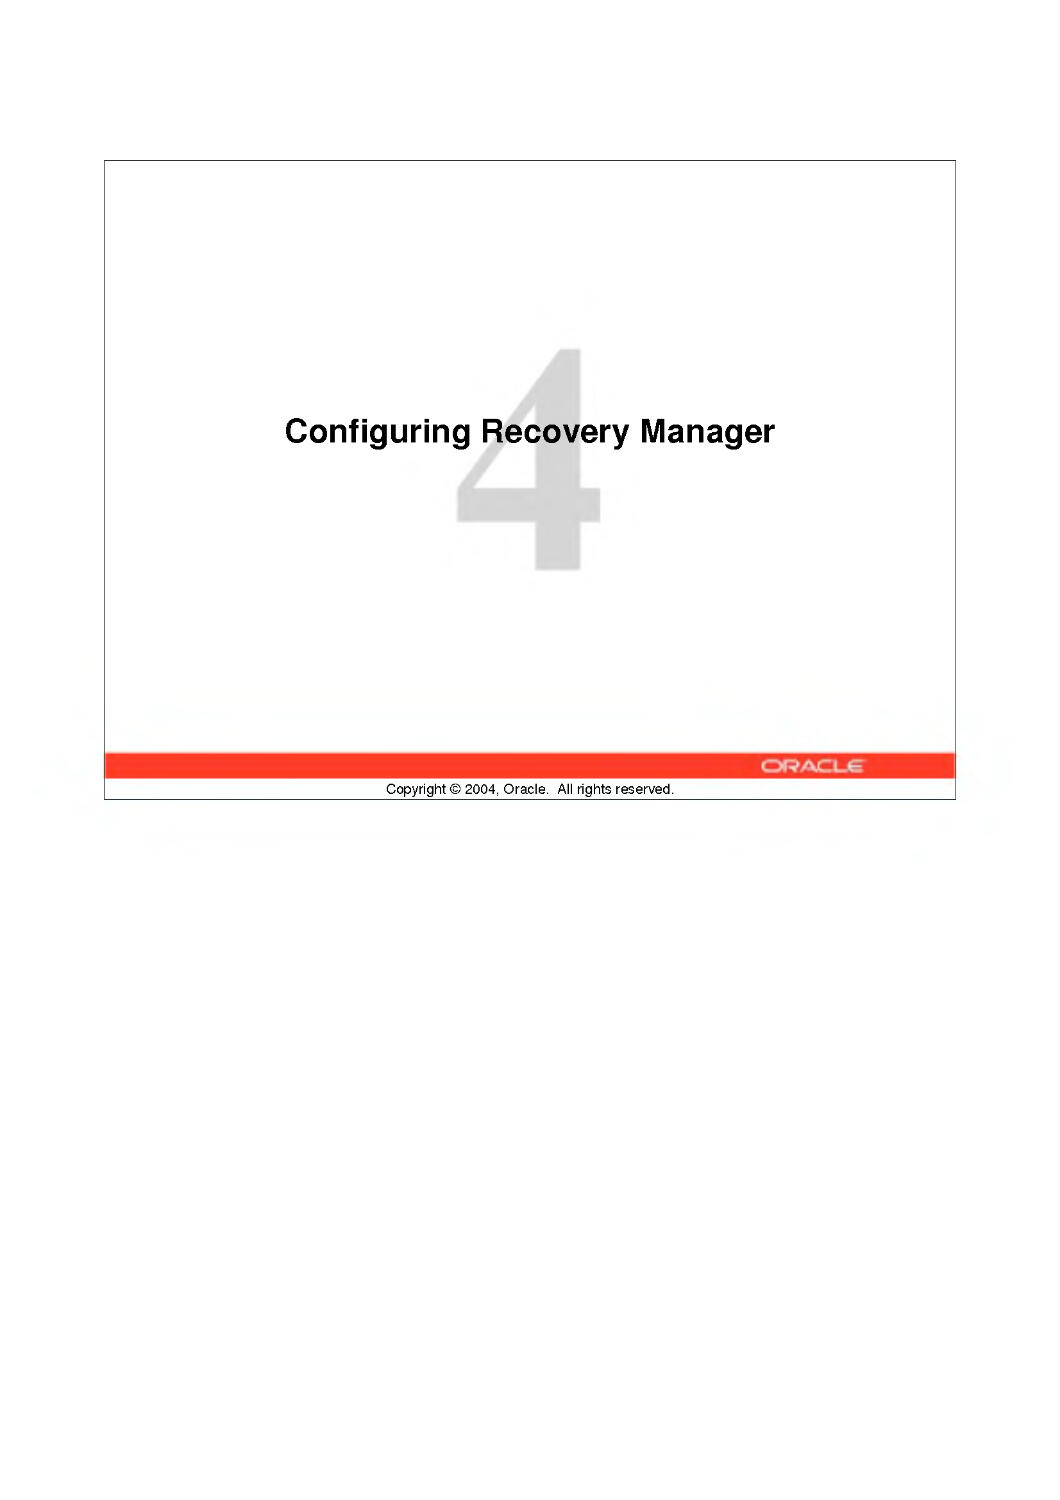 4 Configuring Recovery Manager